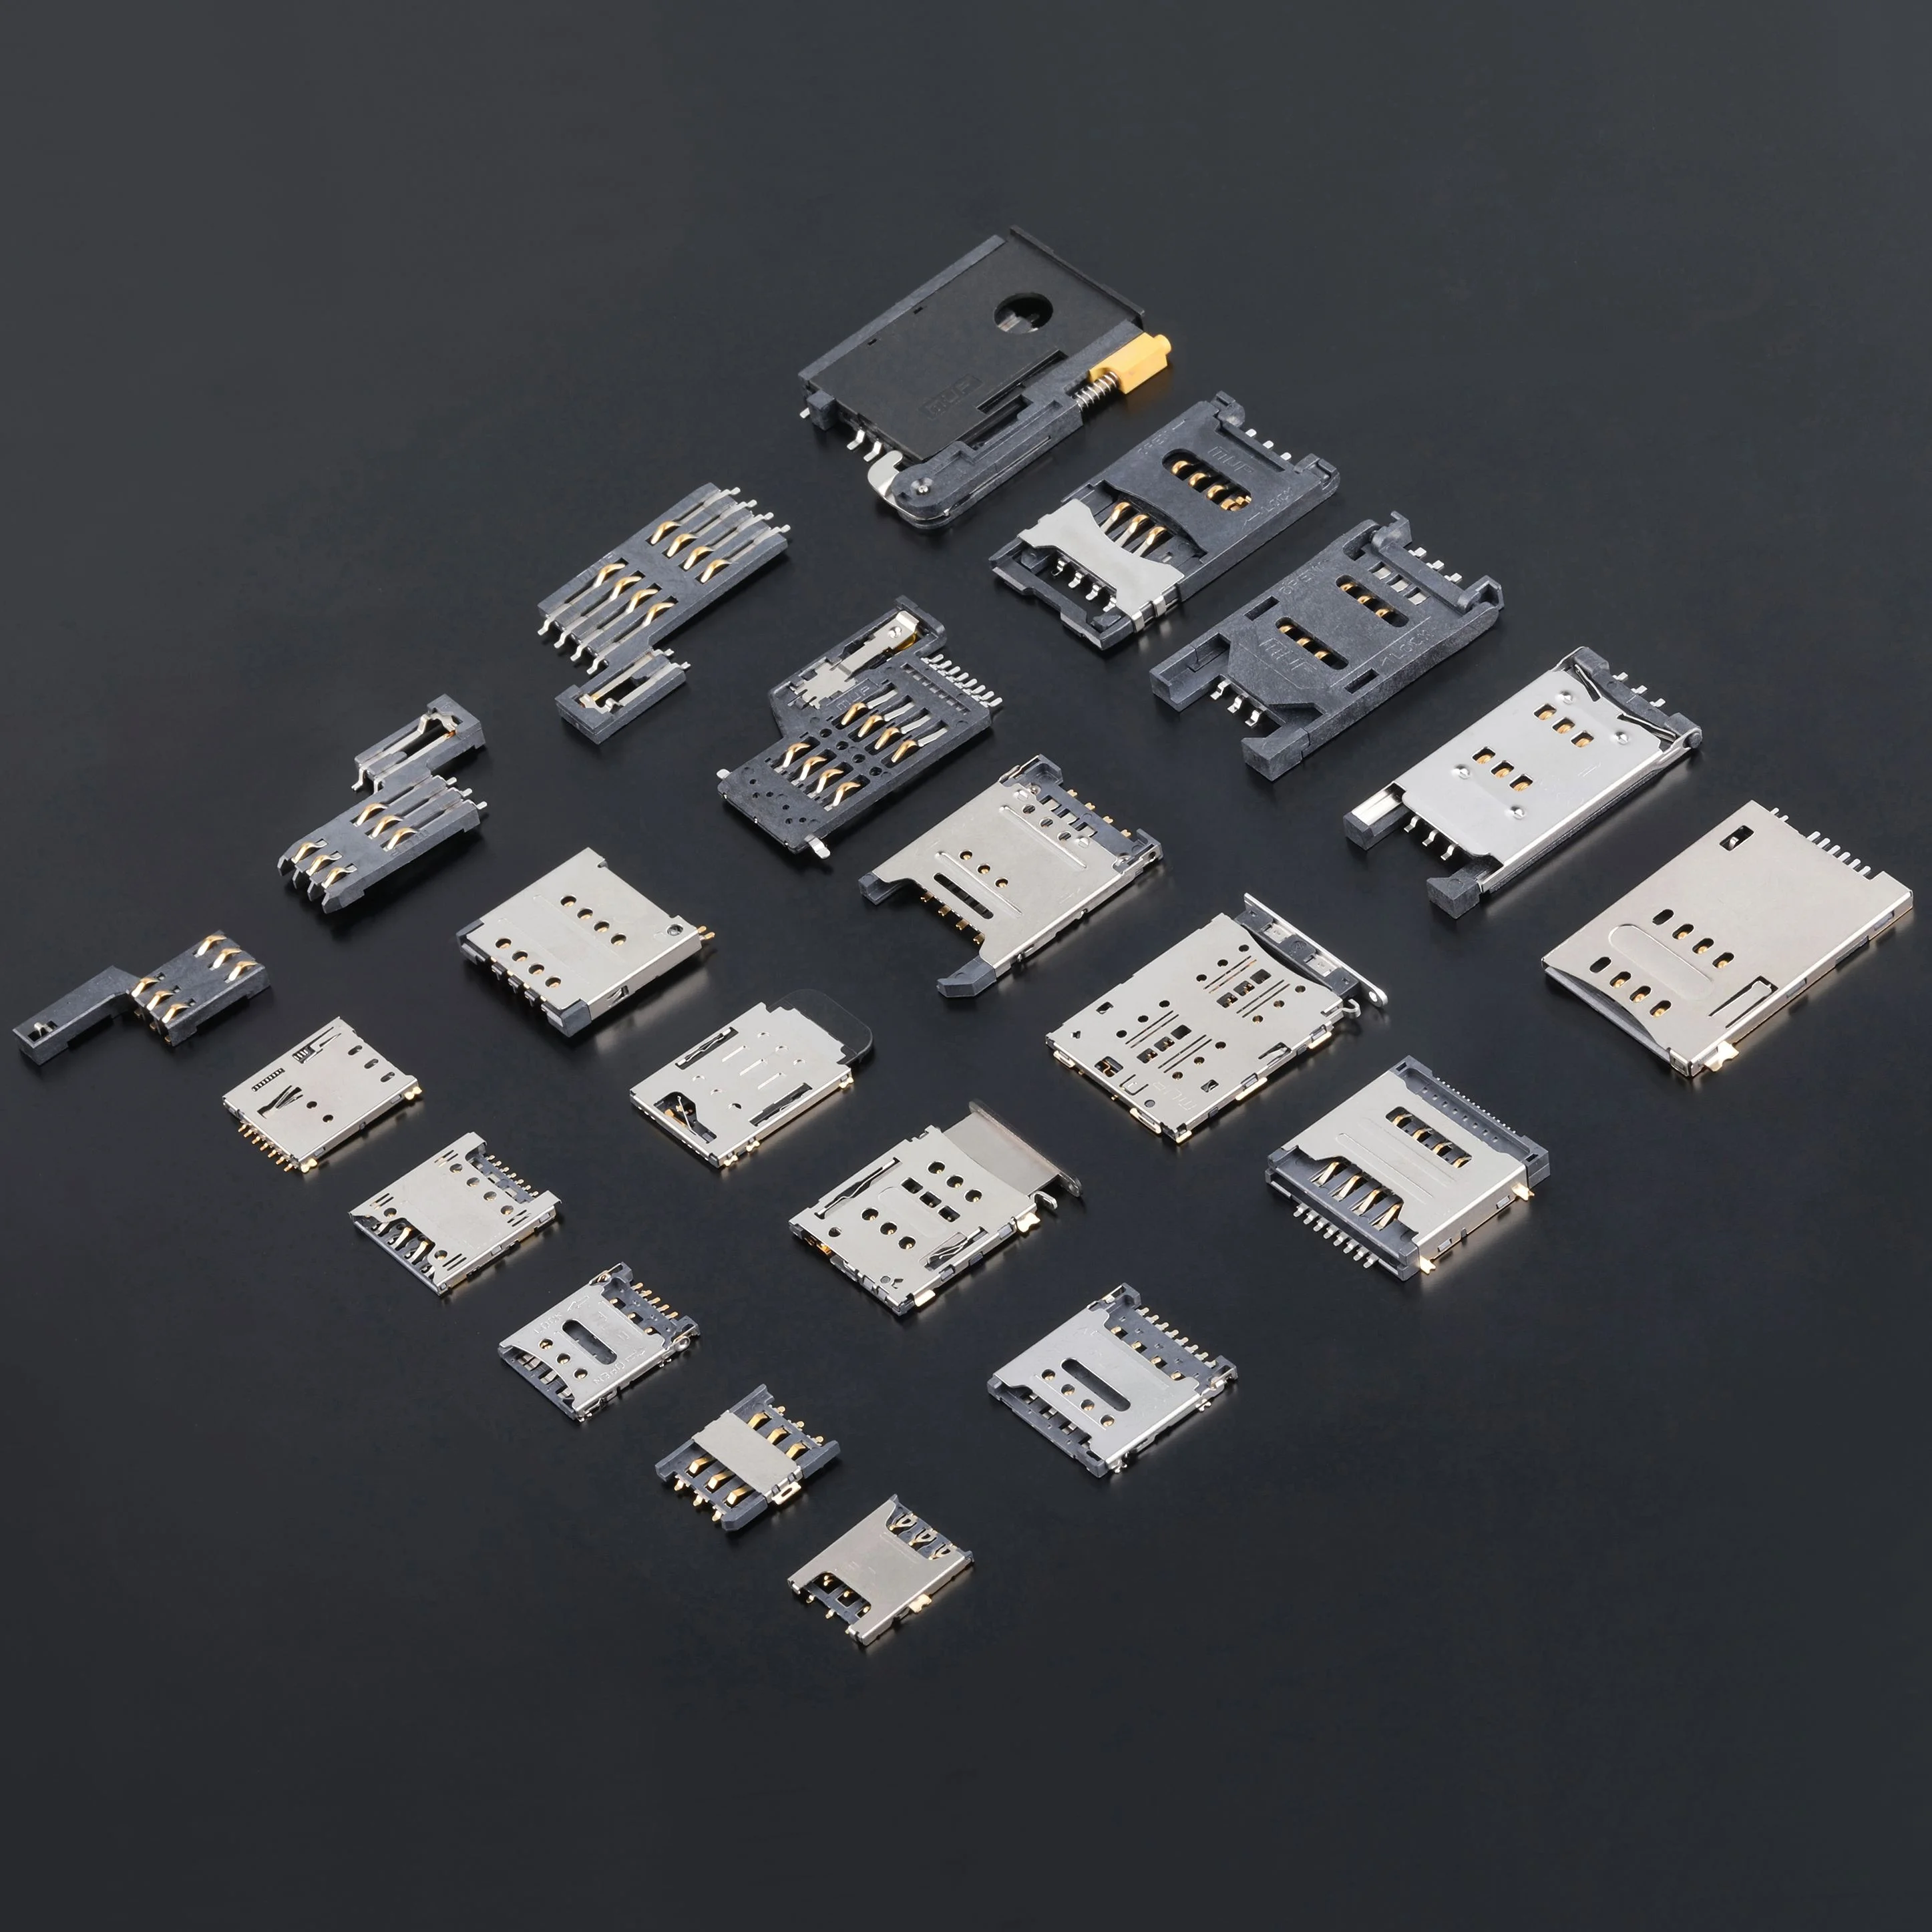 MUP-C867 Factory price  PCB smart card connector IC card reader socket for mobile phone payment POS terminal equipment